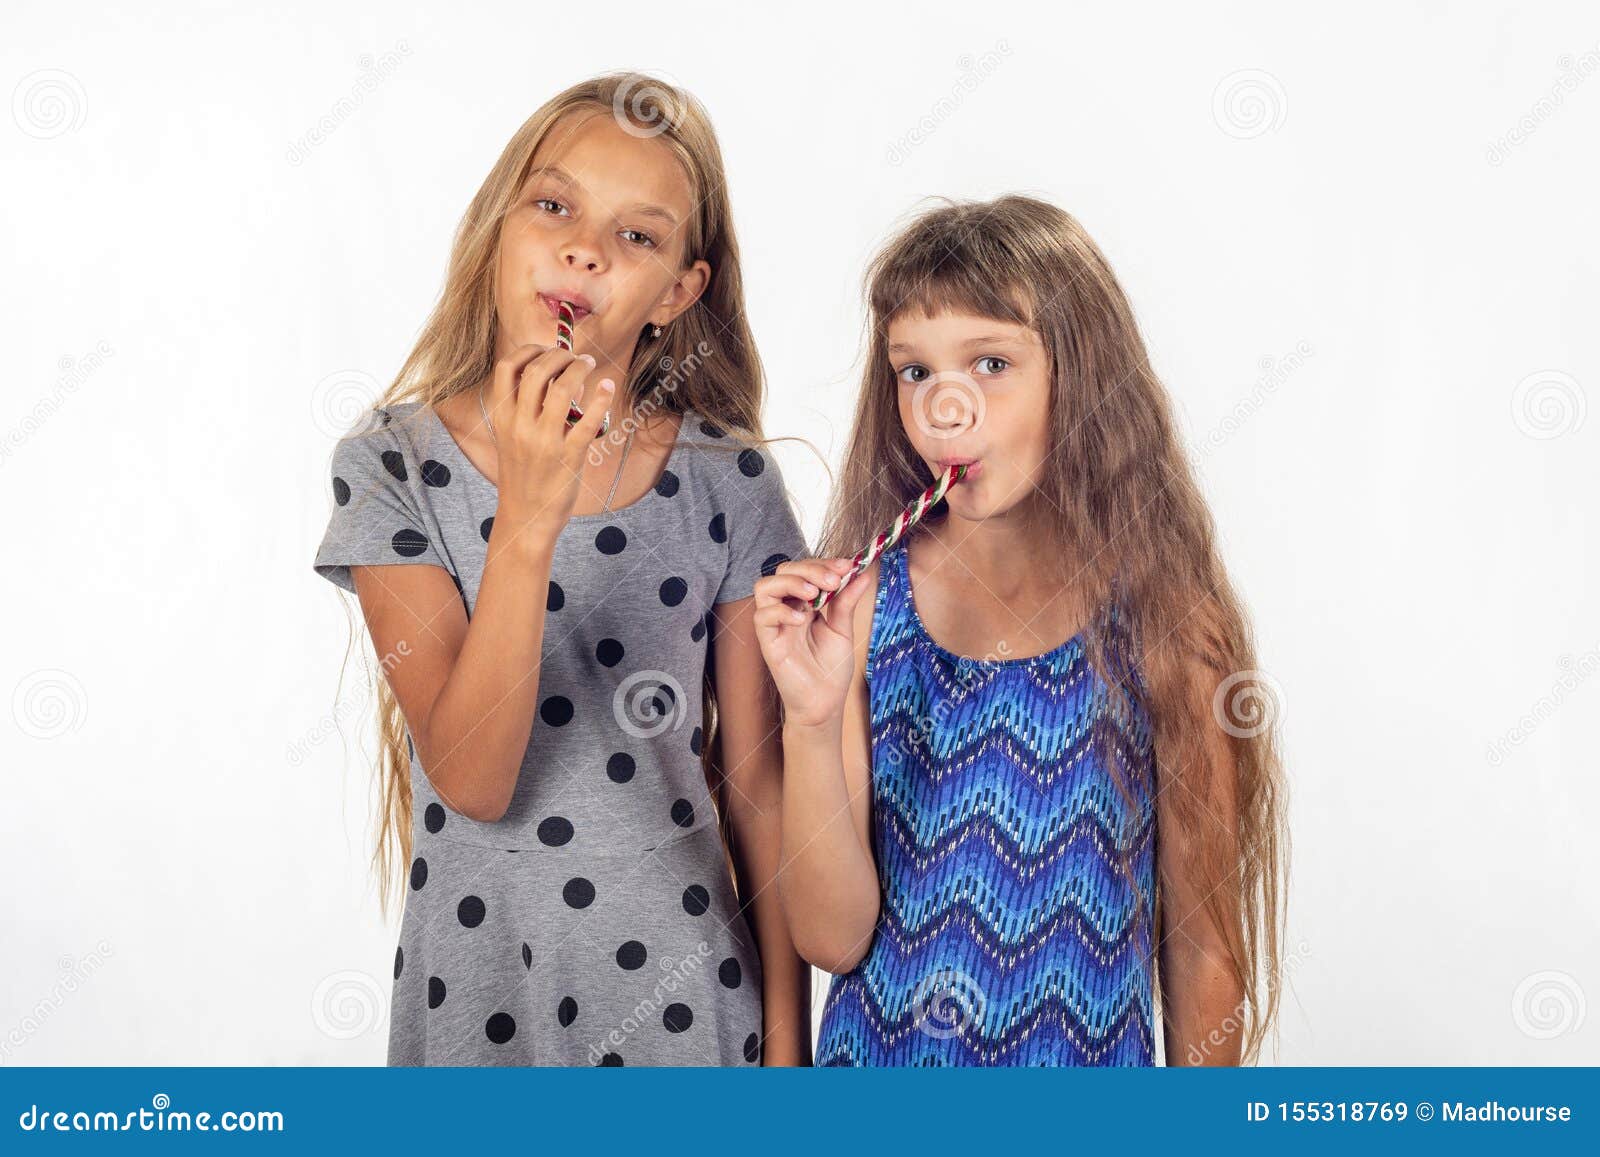 Two Girls Suck Lollipops And Look In The Frame Stock Image Image Of Rejoice Portrait 155318769 